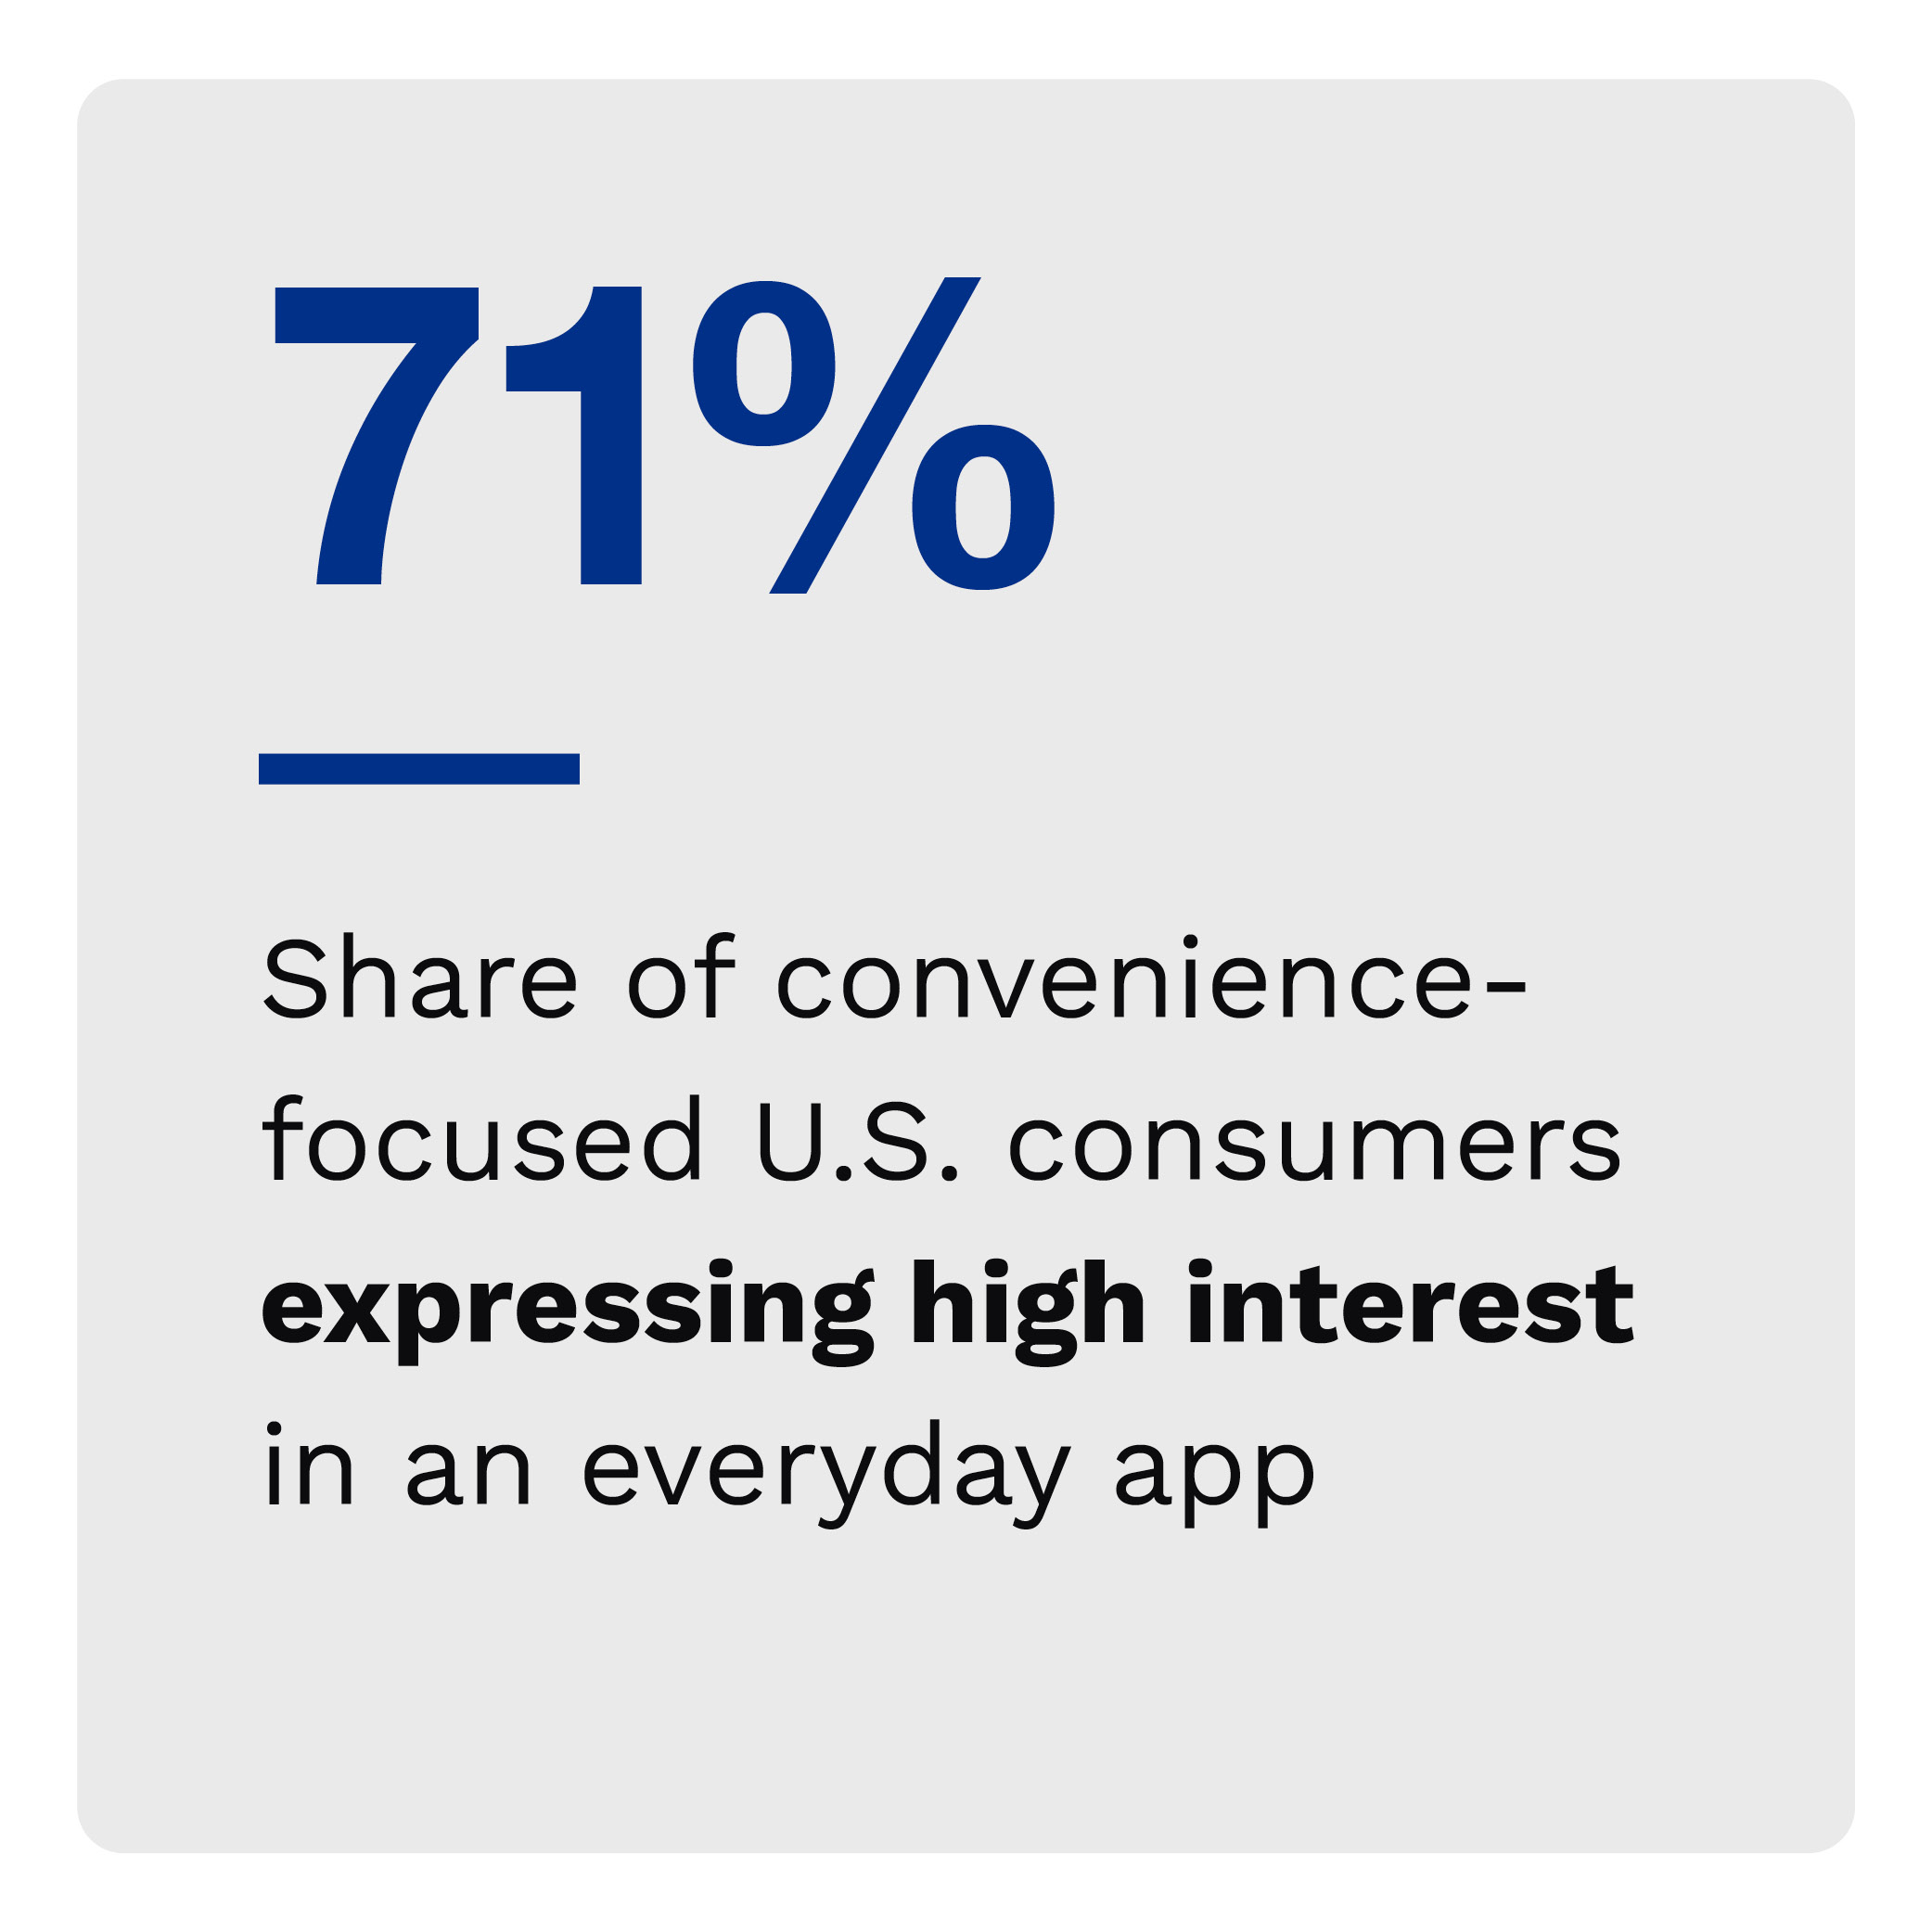 71%: Share of convenience-focused U.S. consumers expressing high interest in an everyday app